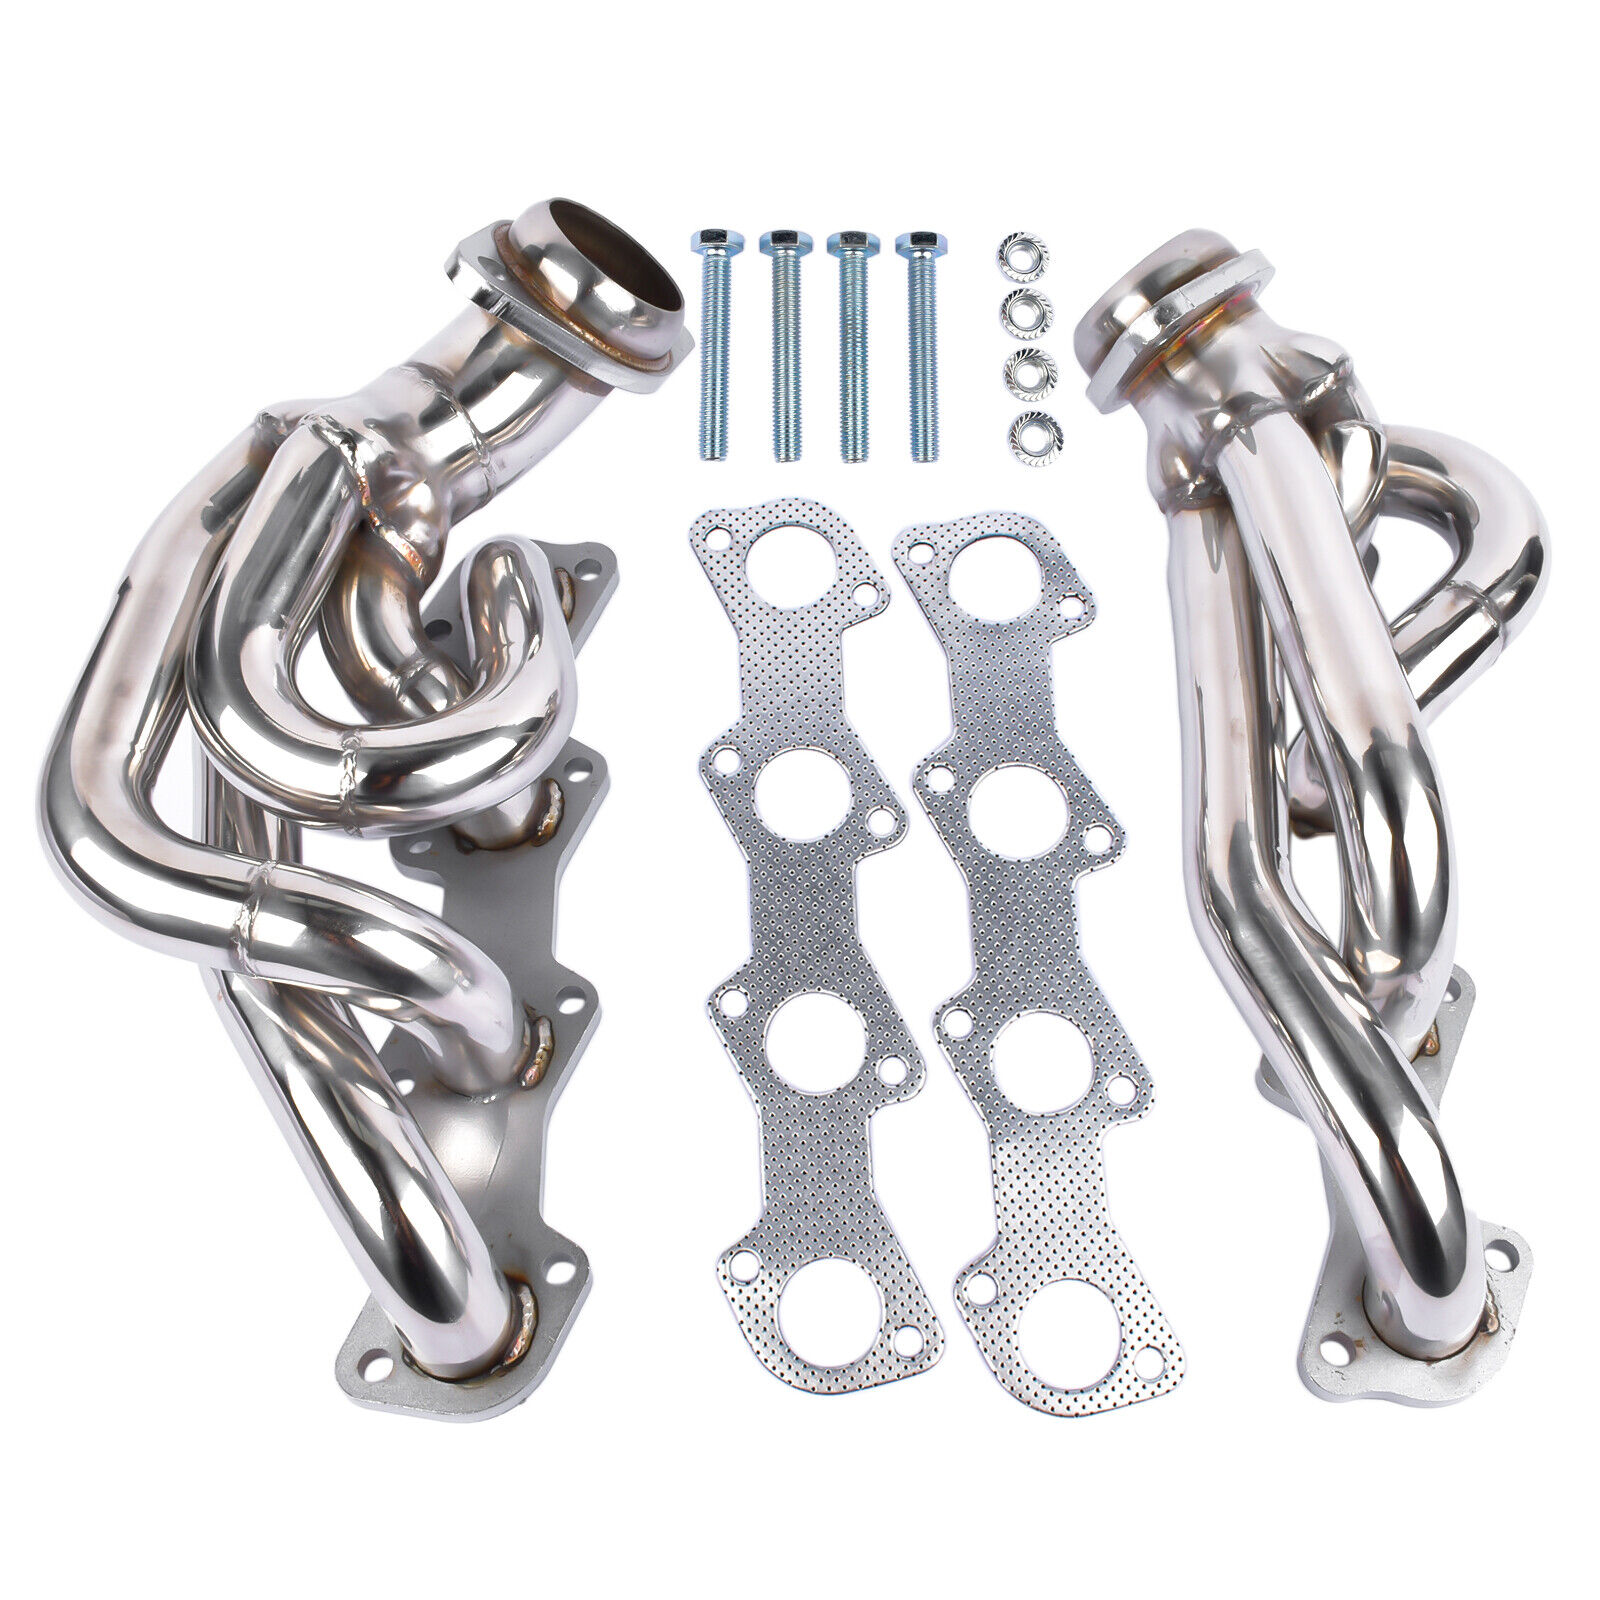 Stainless Steel Shorty Headers Manifold for Ford F150 F250 Expedition 97-03 5.4L